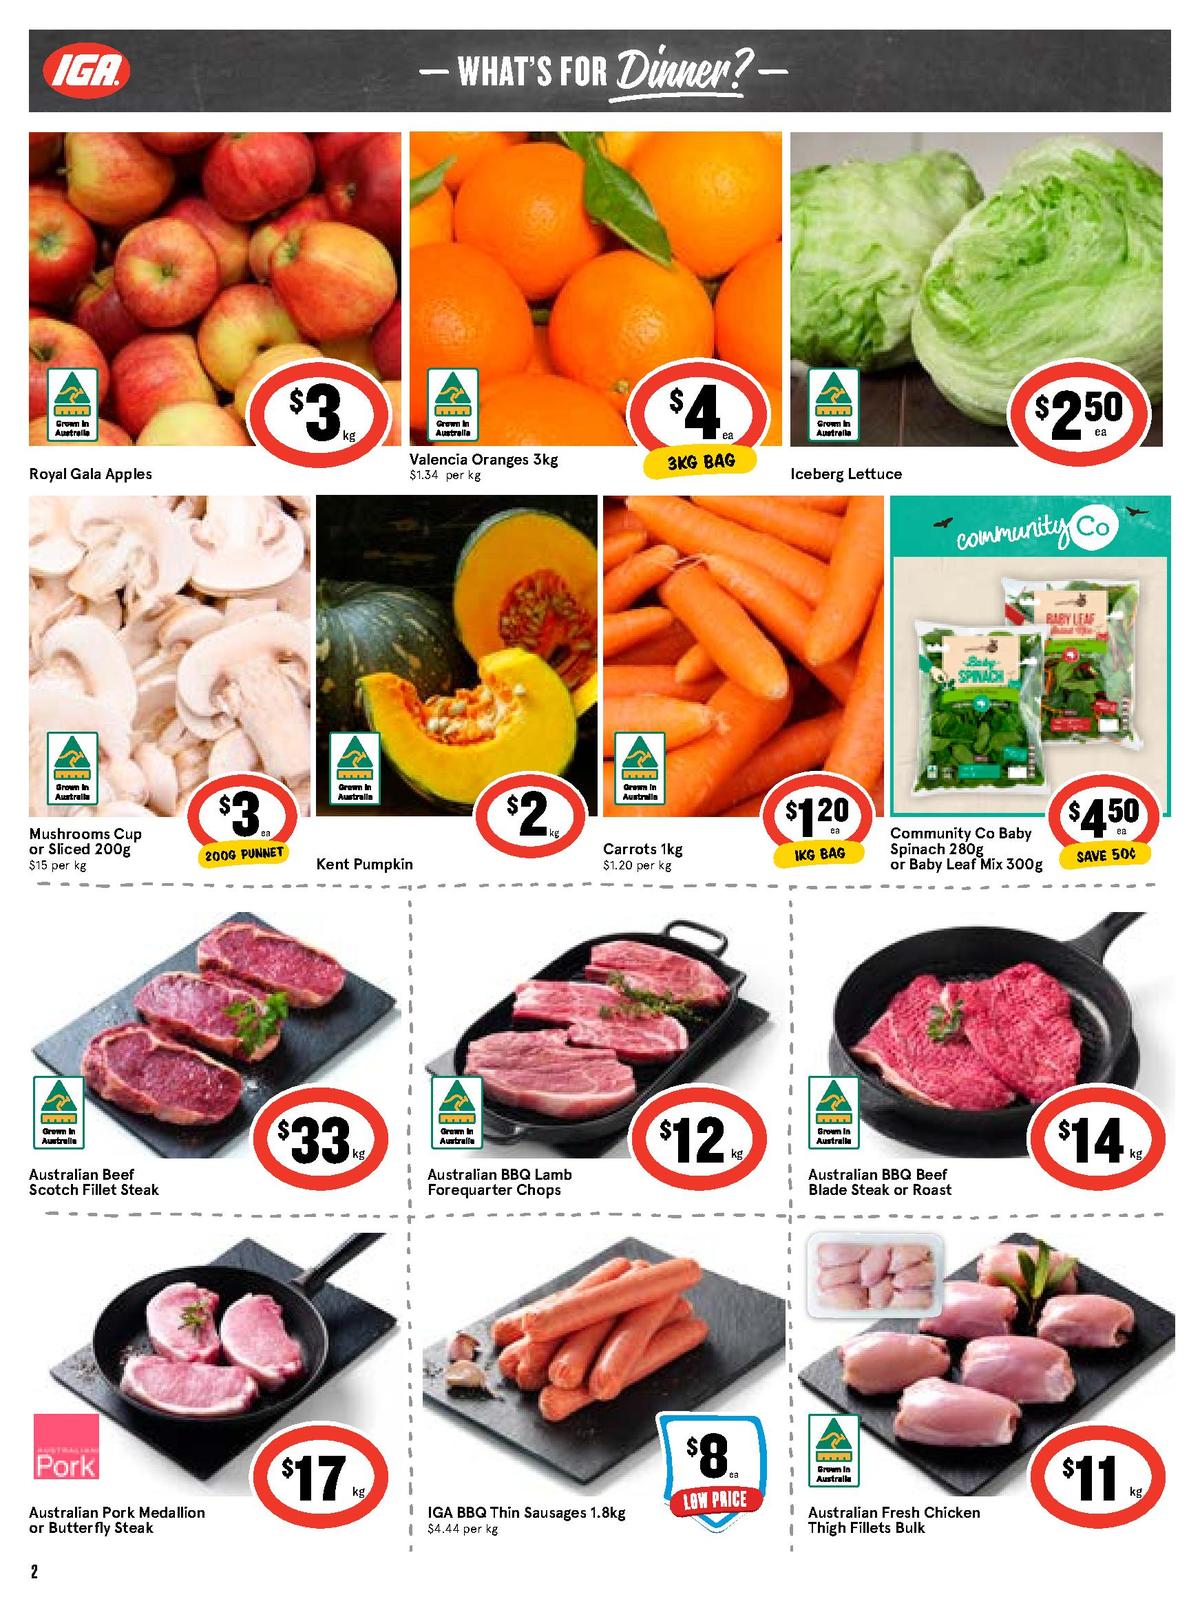 IGA Catalogues from 27 March